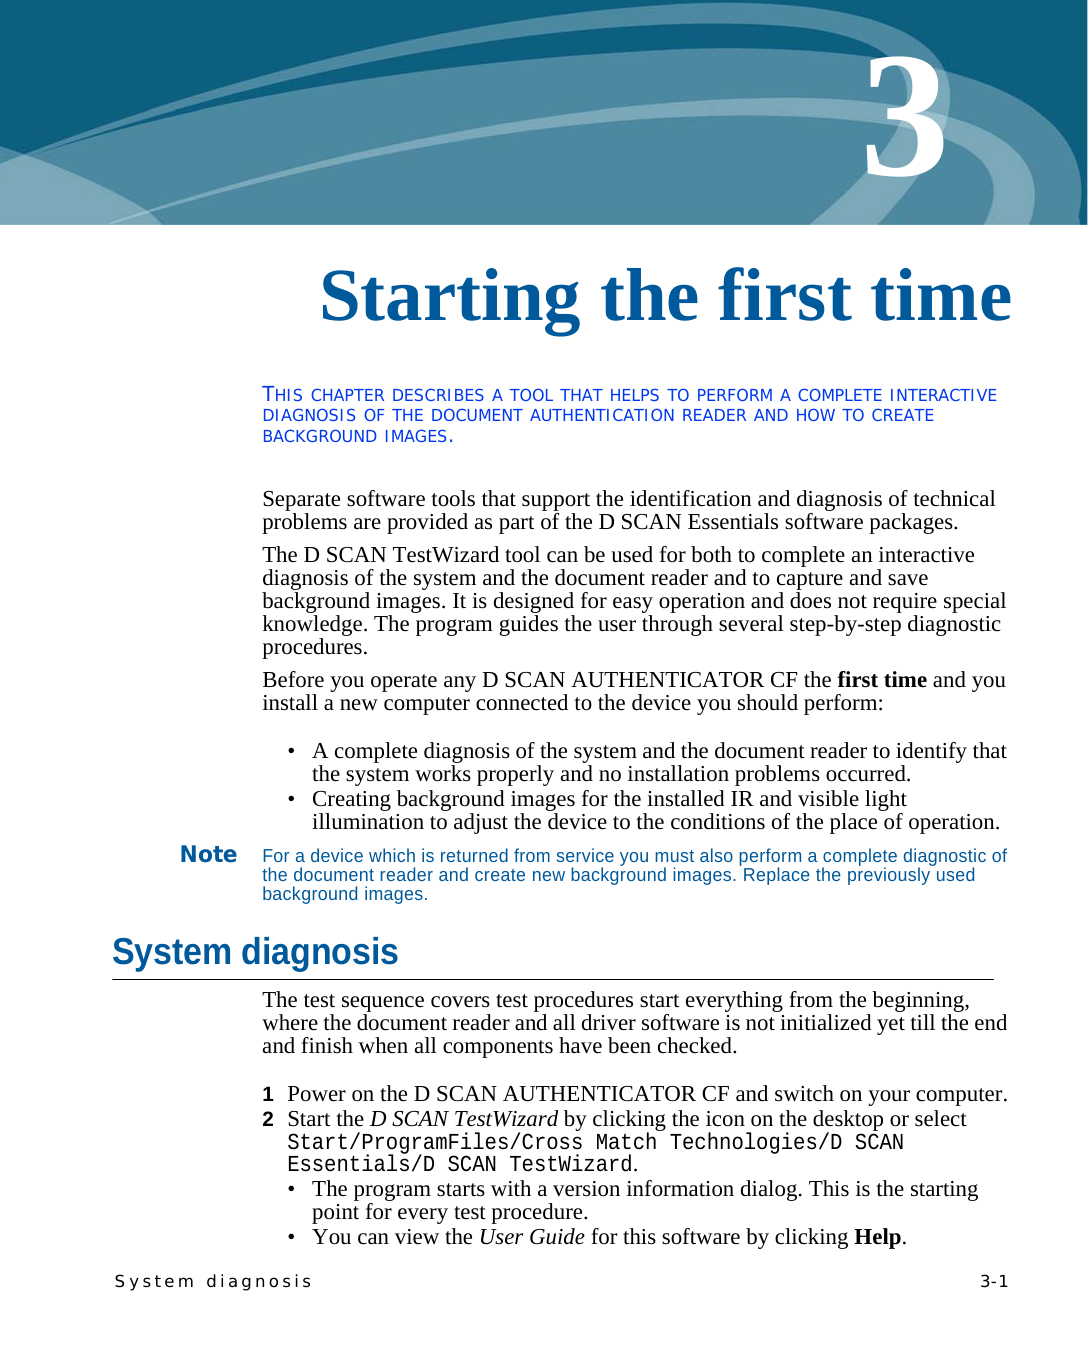 System diagnosis   3-13Chapter 0Starting the first timeTHIS CHAPTER DESCRIBES A TOOL THAT HELPS TO PERFORM A COMPLETE INTERACTIVE DIAGNOSIS OF THE DOCUMENT AUTHENTICATION READER AND HOW TO CREATE BACKGROUND IMAGES.Separate software tools that support the identification and diagnosis of technical problems are provided as part of the D SCAN Essentials software packages.The D SCAN TestWizard tool can be used for both to complete an interactive diagnosis of the system and the document reader and to capture and save background images. It is designed for easy operation and does not require special knowledge. The program guides the user through several step-by-step diagnostic procedures.Before you operate any D SCAN AUTHENTICATOR CF the first time and you install a new computer connected to the device you should perform:• A complete diagnosis of the system and the document reader to identify that the system works properly and no installation problems occurred.• Creating background images for the installed IR and visible light illumination to adjust the device to the conditions of the place of operation.NoteFor a device which is returned from service you must also perform a complete diagnostic of the document reader and create new background images. Replace the previously used background images.System diagnosisThe test sequence covers test procedures start everything from the beginning, where the document reader and all driver software is not initialized yet till the end and finish when all components have been checked.1  Power on the D SCAN AUTHENTICATOR CF and switch on your computer.2  Start the D SCAN TestWizard by clicking the icon on the desktop or select Start/ProgramFiles/Cross Match Technologies/D SCAN Essentials/D SCAN TestWizard.• The program starts with a version information dialog. This is the starting point for every test procedure.• You can view the User Guide for this software by clicking Help.